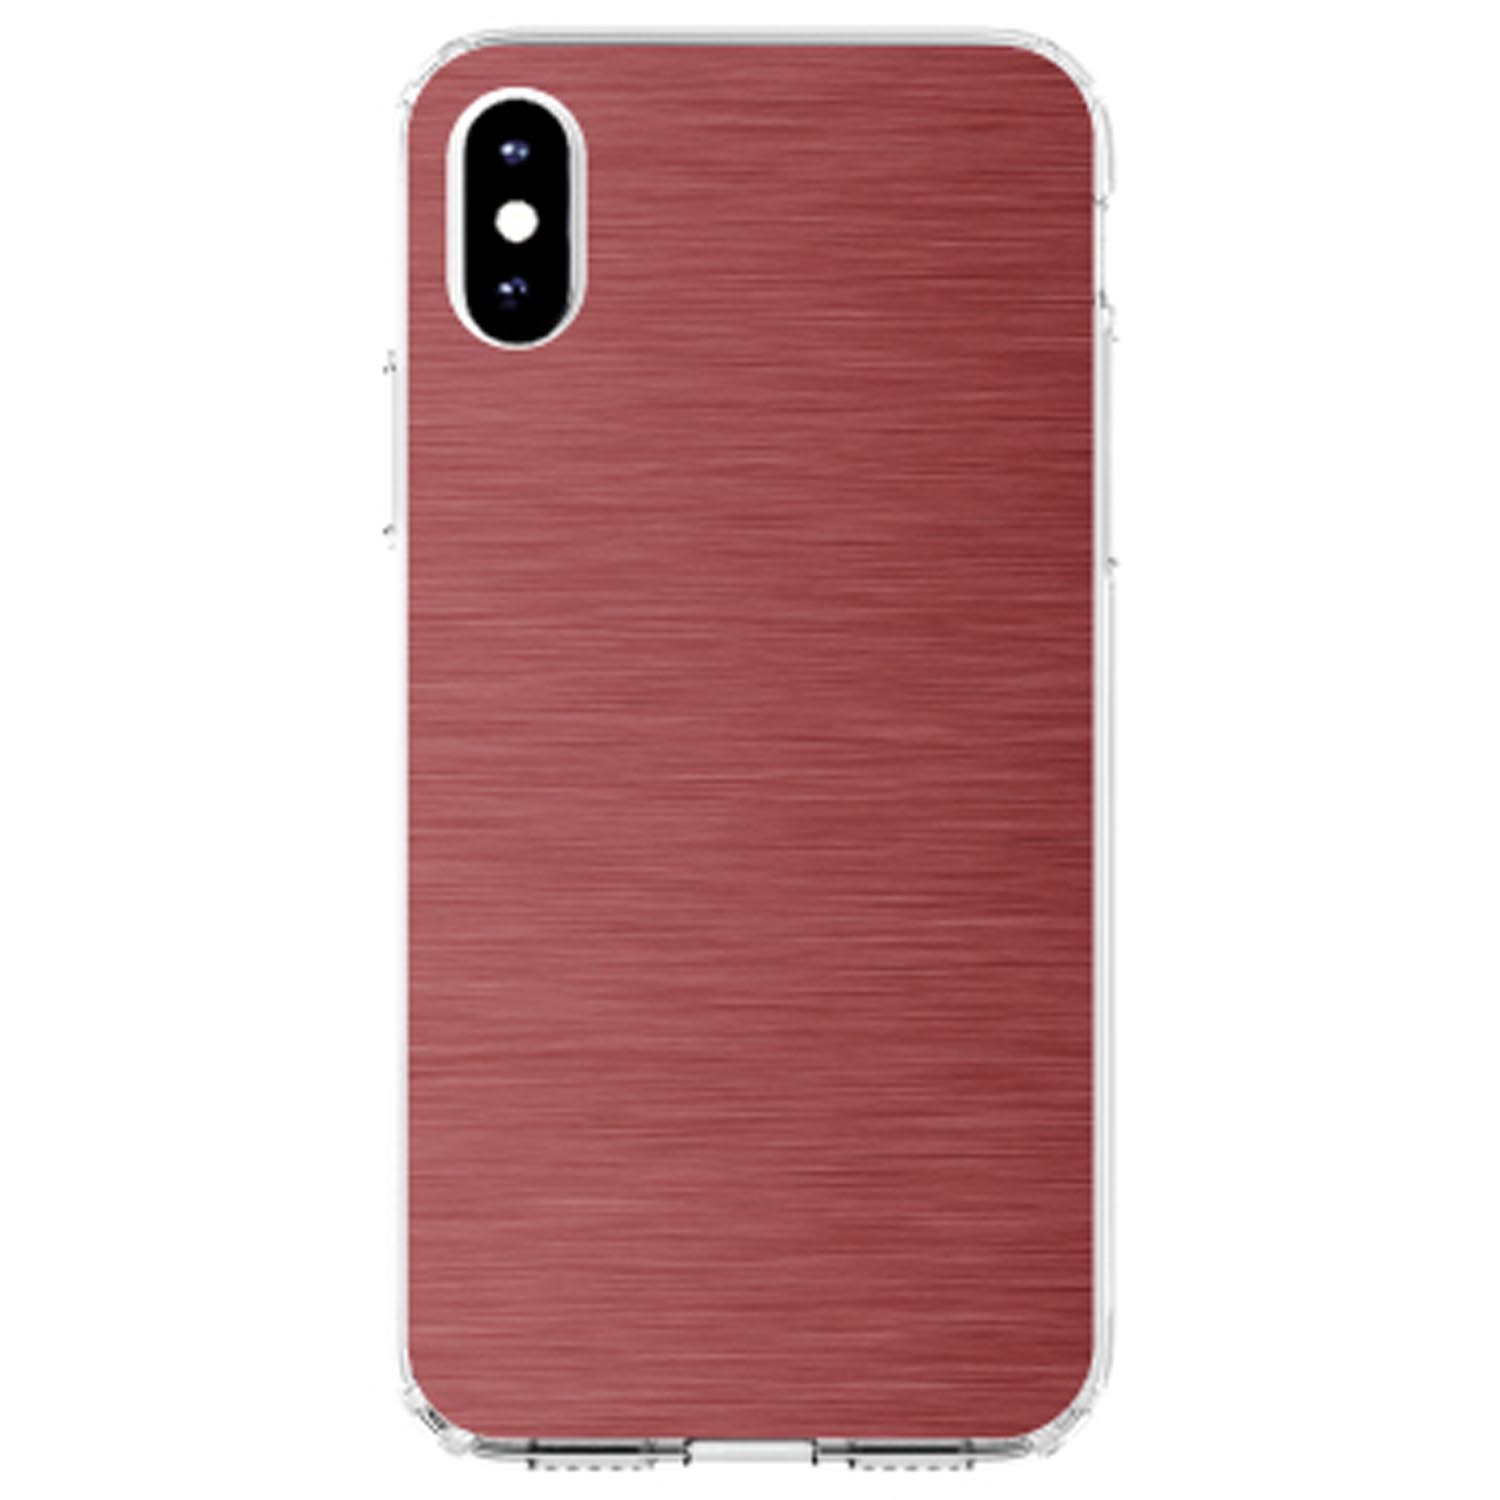 DistinctInk Clear Shockproof Hybrid Case for iPhone X / XS (5.8" Screen) - TPU Bumper, Acrylic Back, Tempered Glass Screen Protector - Red Stainless Steel Image - Printed Image of Stainless - image 1 of 5